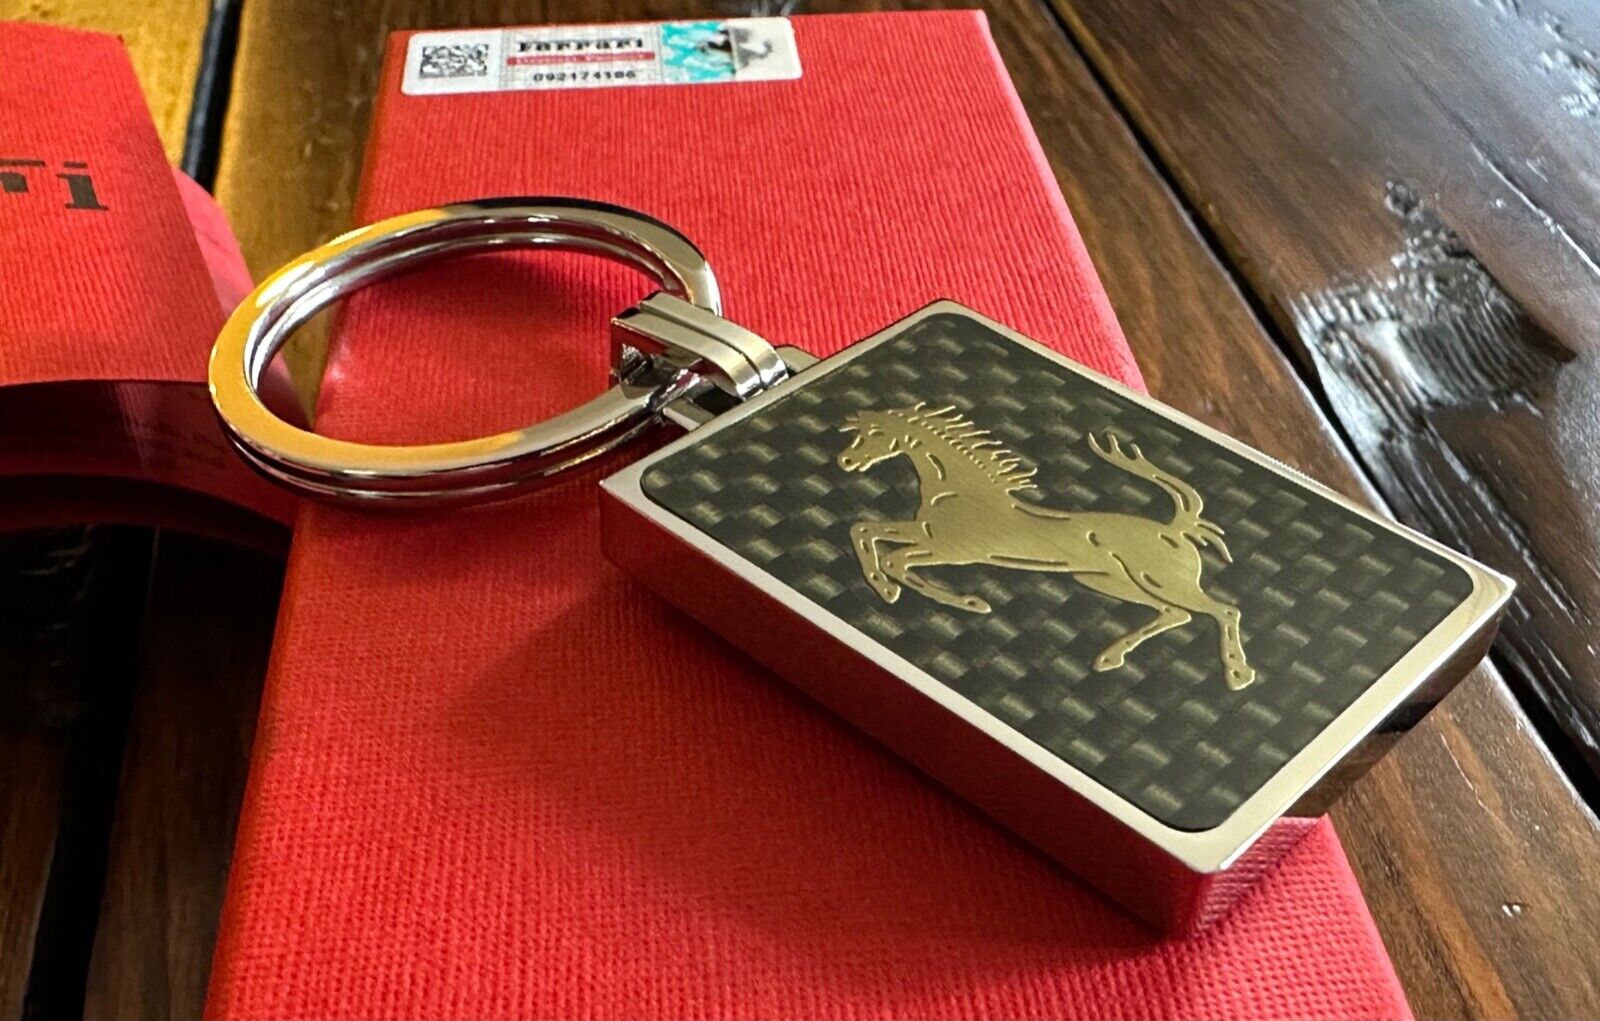 Genuine Ferrari Carbon Fiber Keyring By Damiani Made in Italy Collectible & RARE